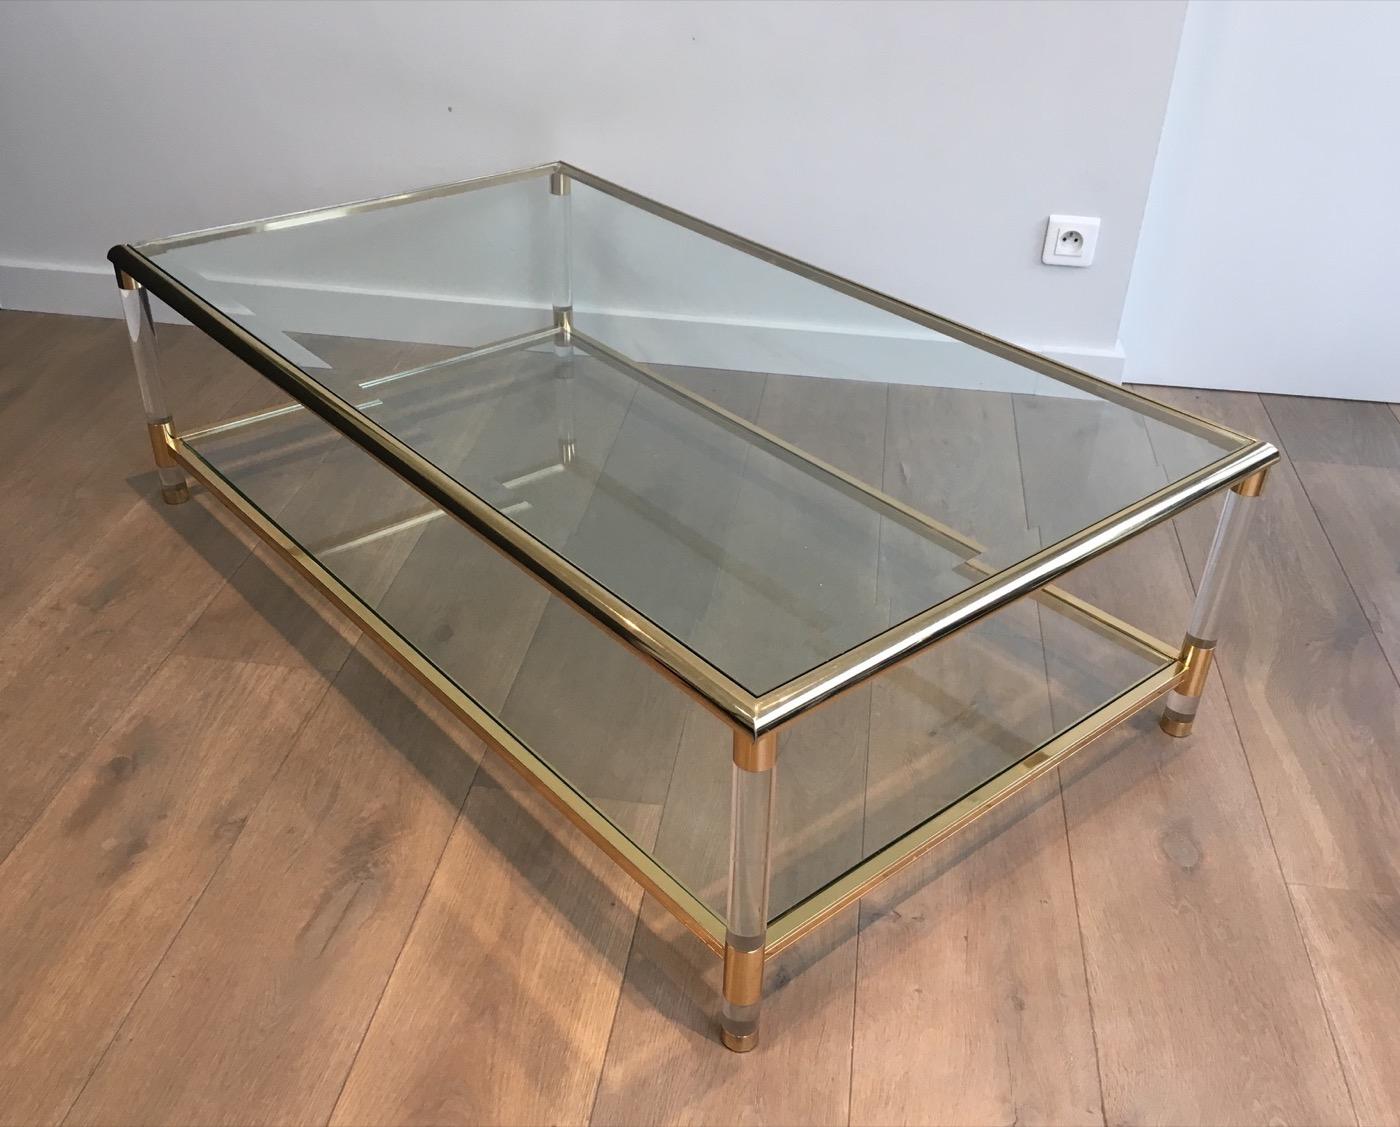 This large coffee table is made of gold gilt nickel with round Lucite legs. This cocktail table has a great design with unusual rounded corners. It is French, circa 1970.